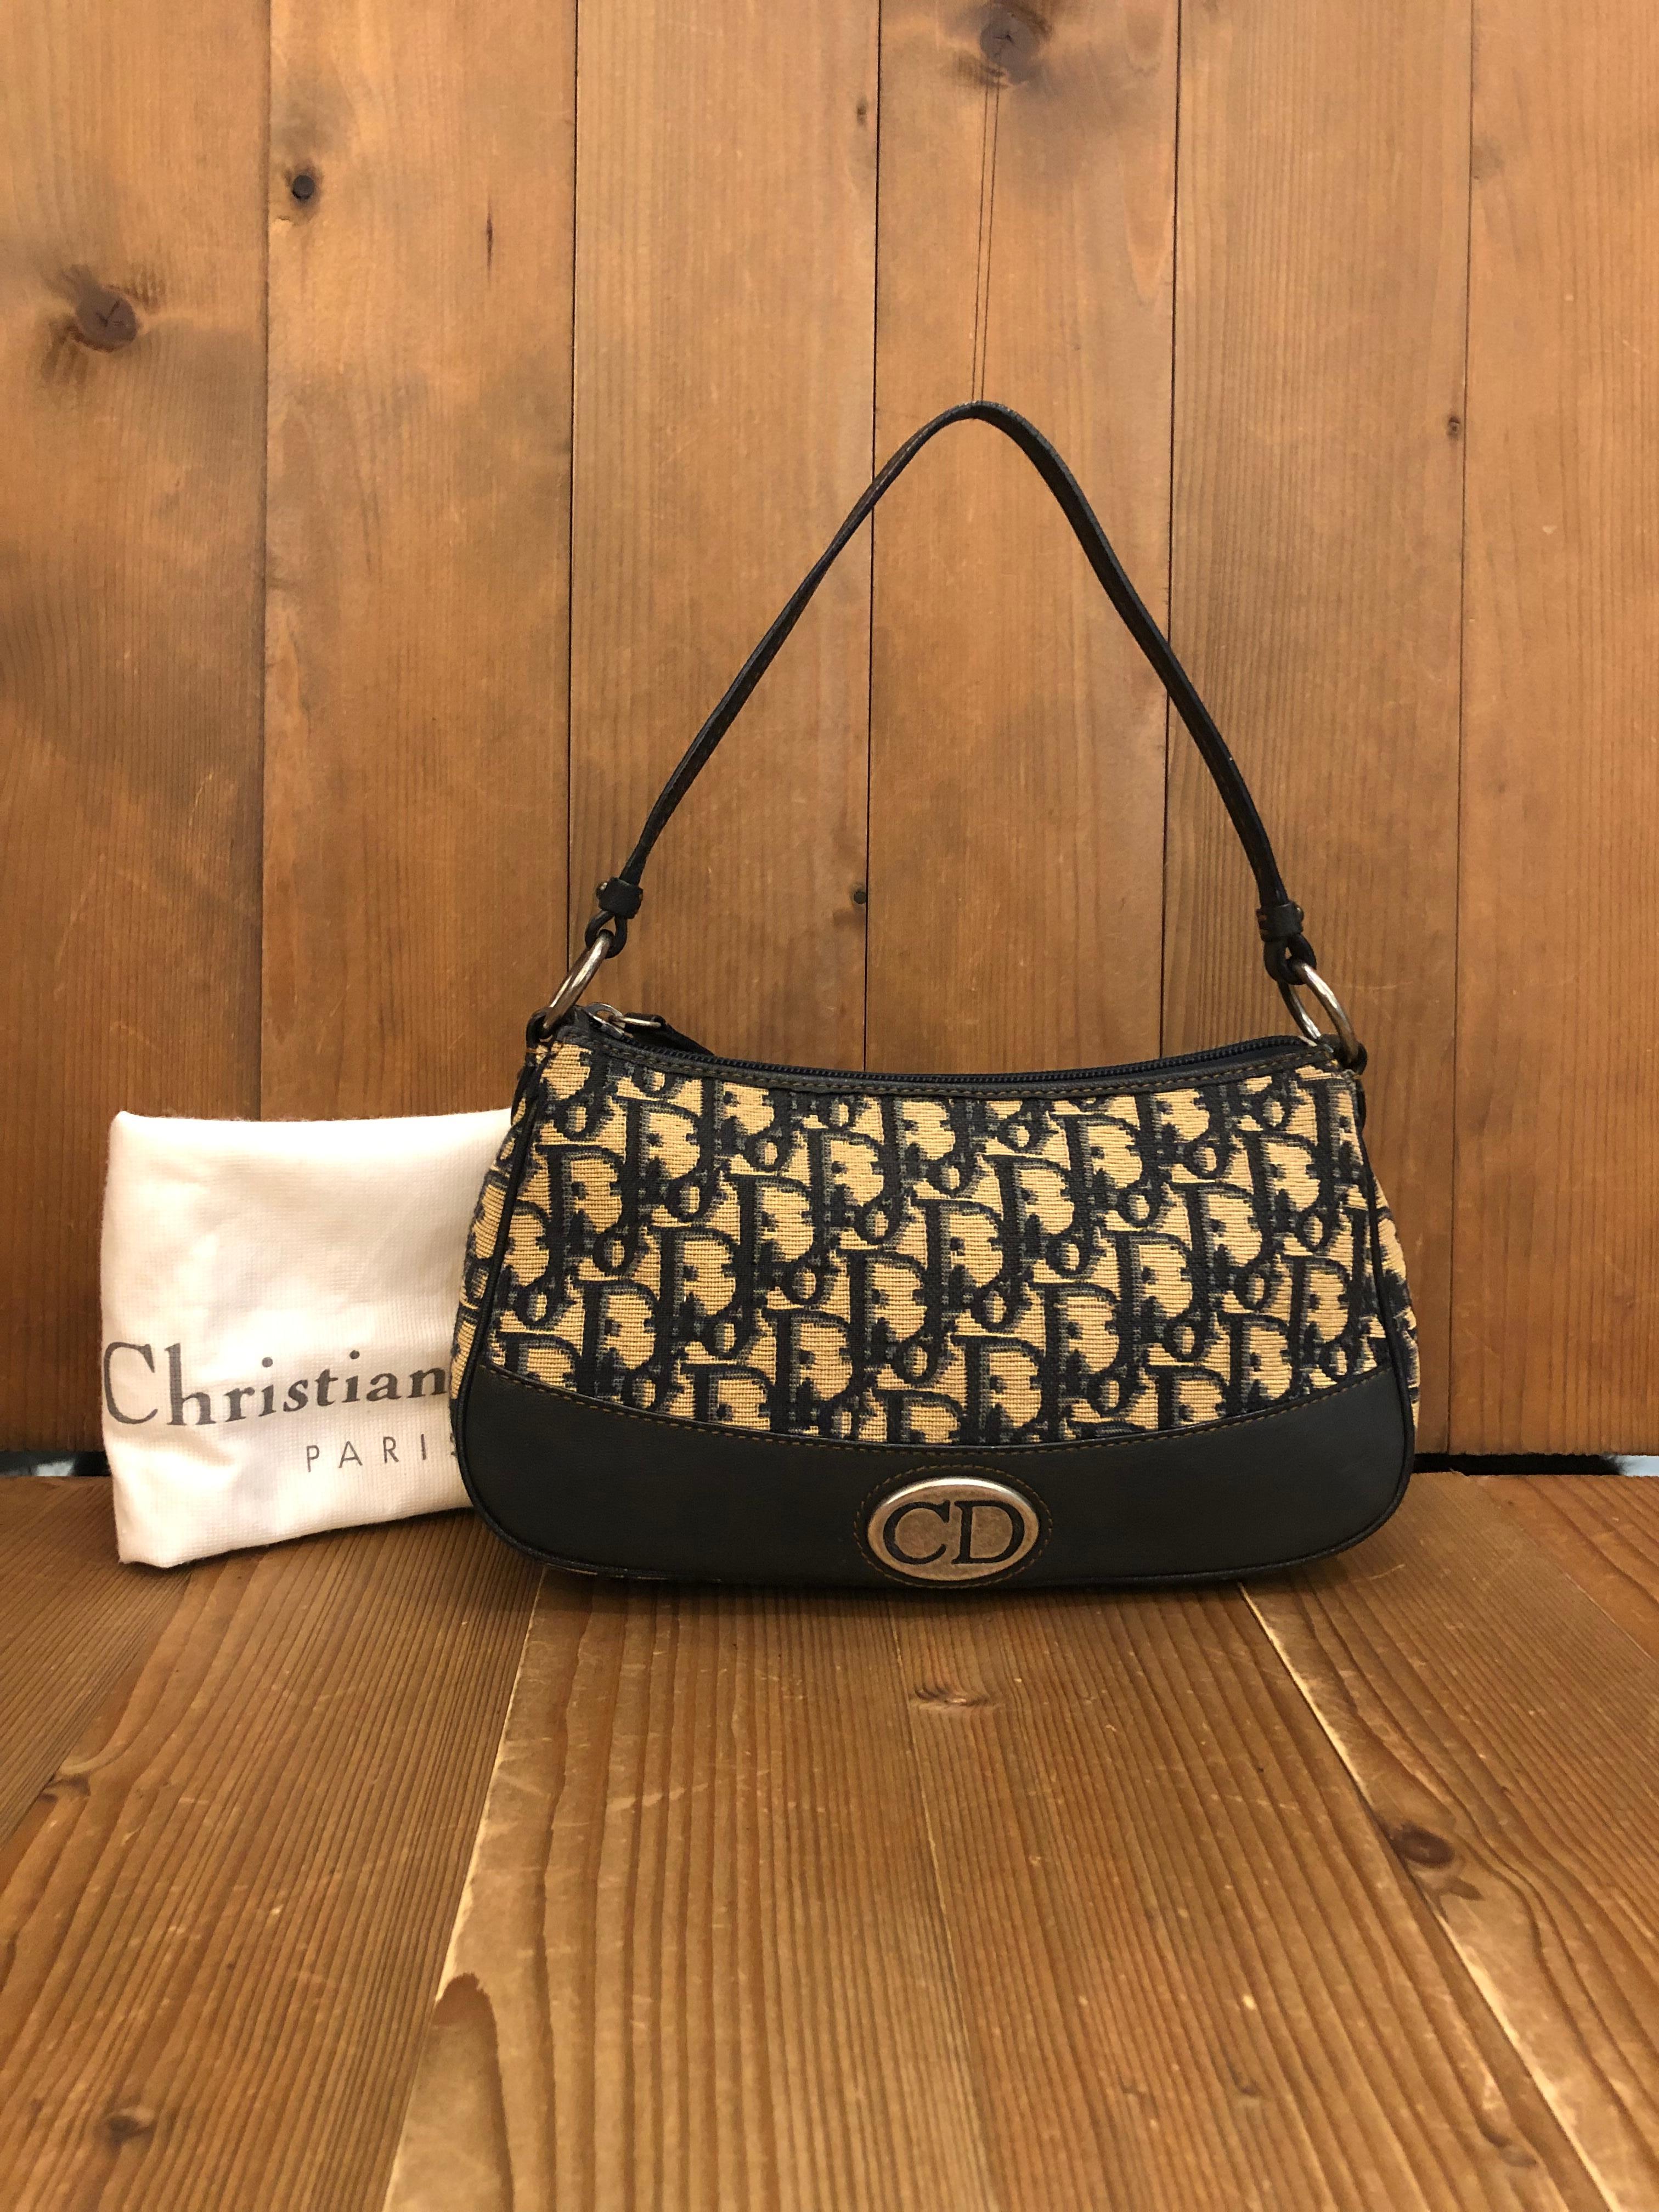 This Christian Dior pouch handbag is crafted of Dior’s iconic trotter jacquard and leather in navy featuring a leather handle that allows you to use it as shoulder pouch. Top zipper closure opens to a navy fabric interior featuring one open pocket.